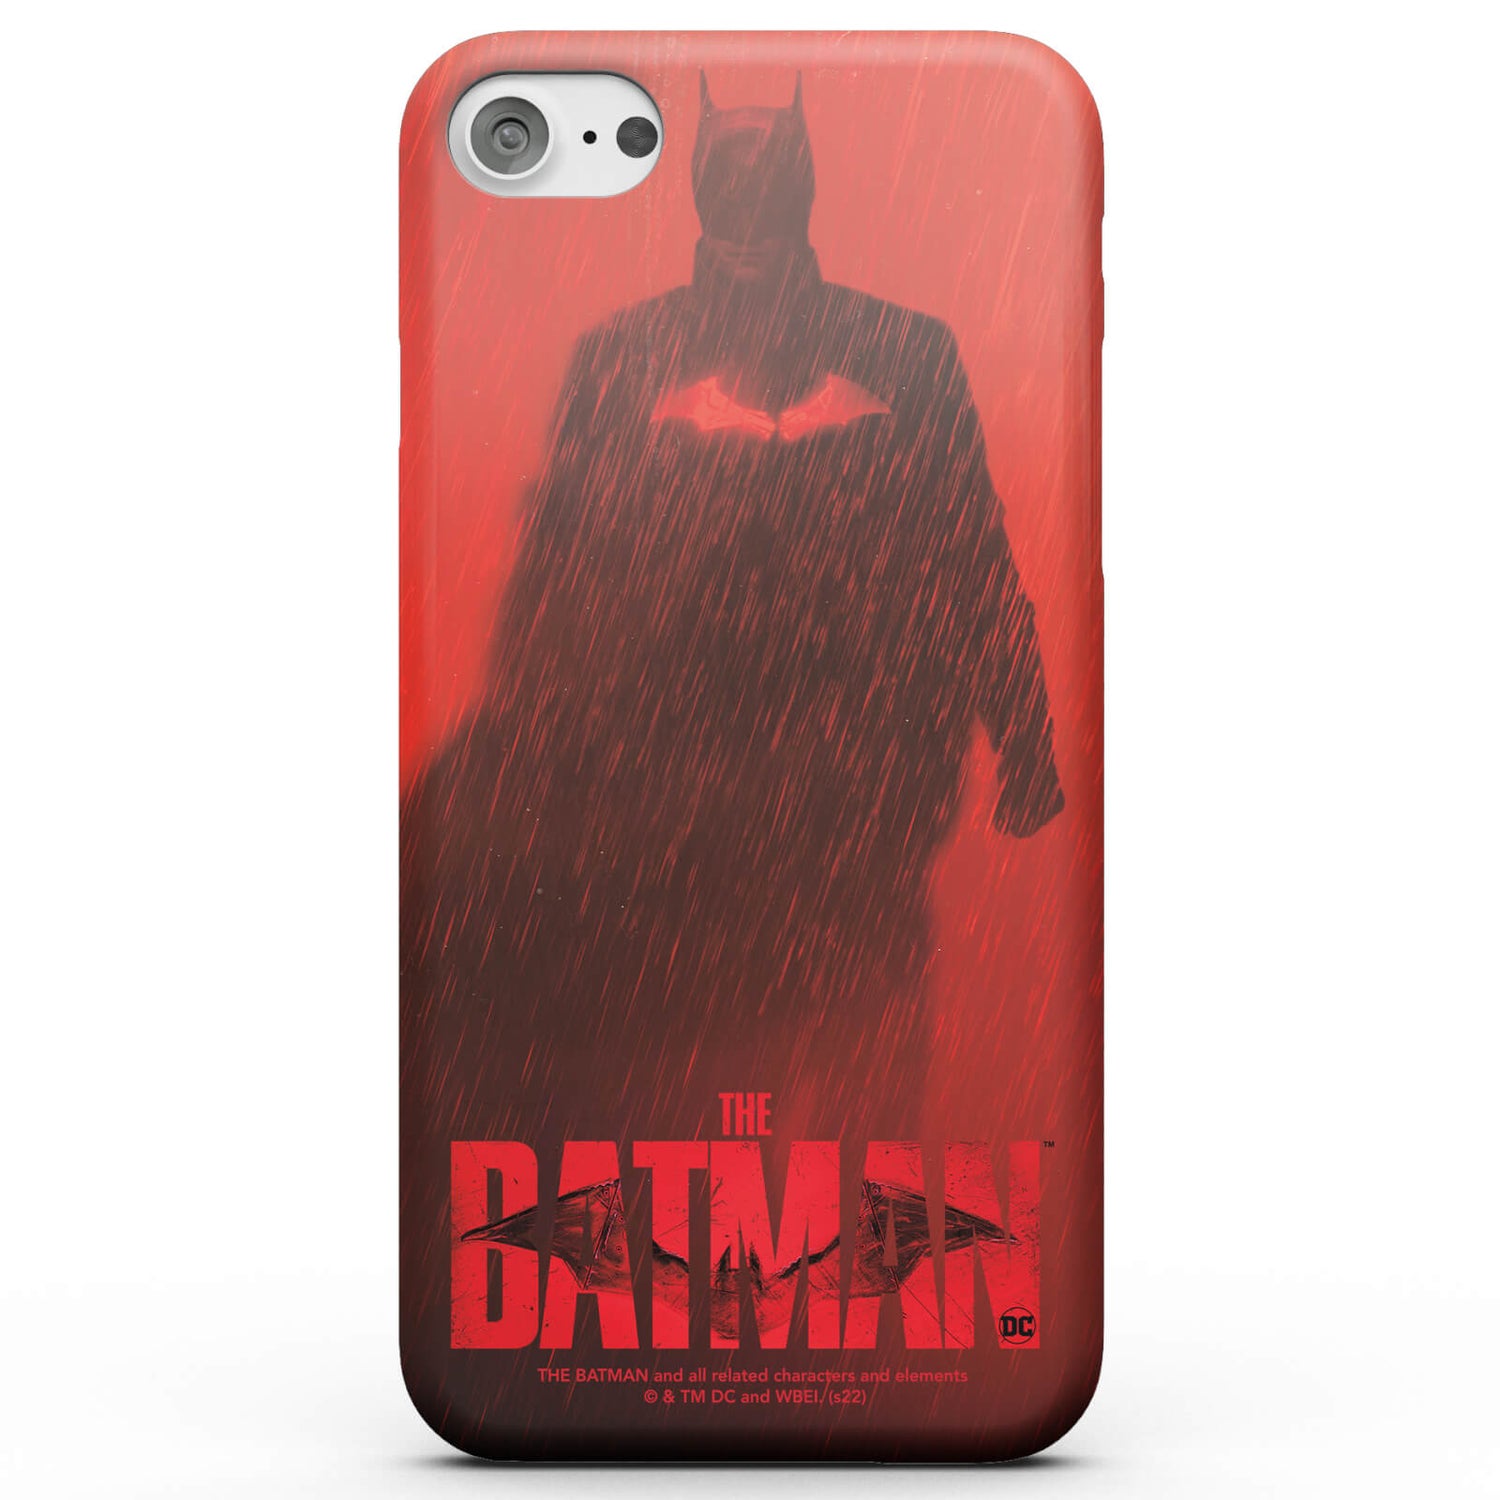 The Batman Poster Phone Case for iPhone and Android - iPhone 7 Plus - Snap case - mat